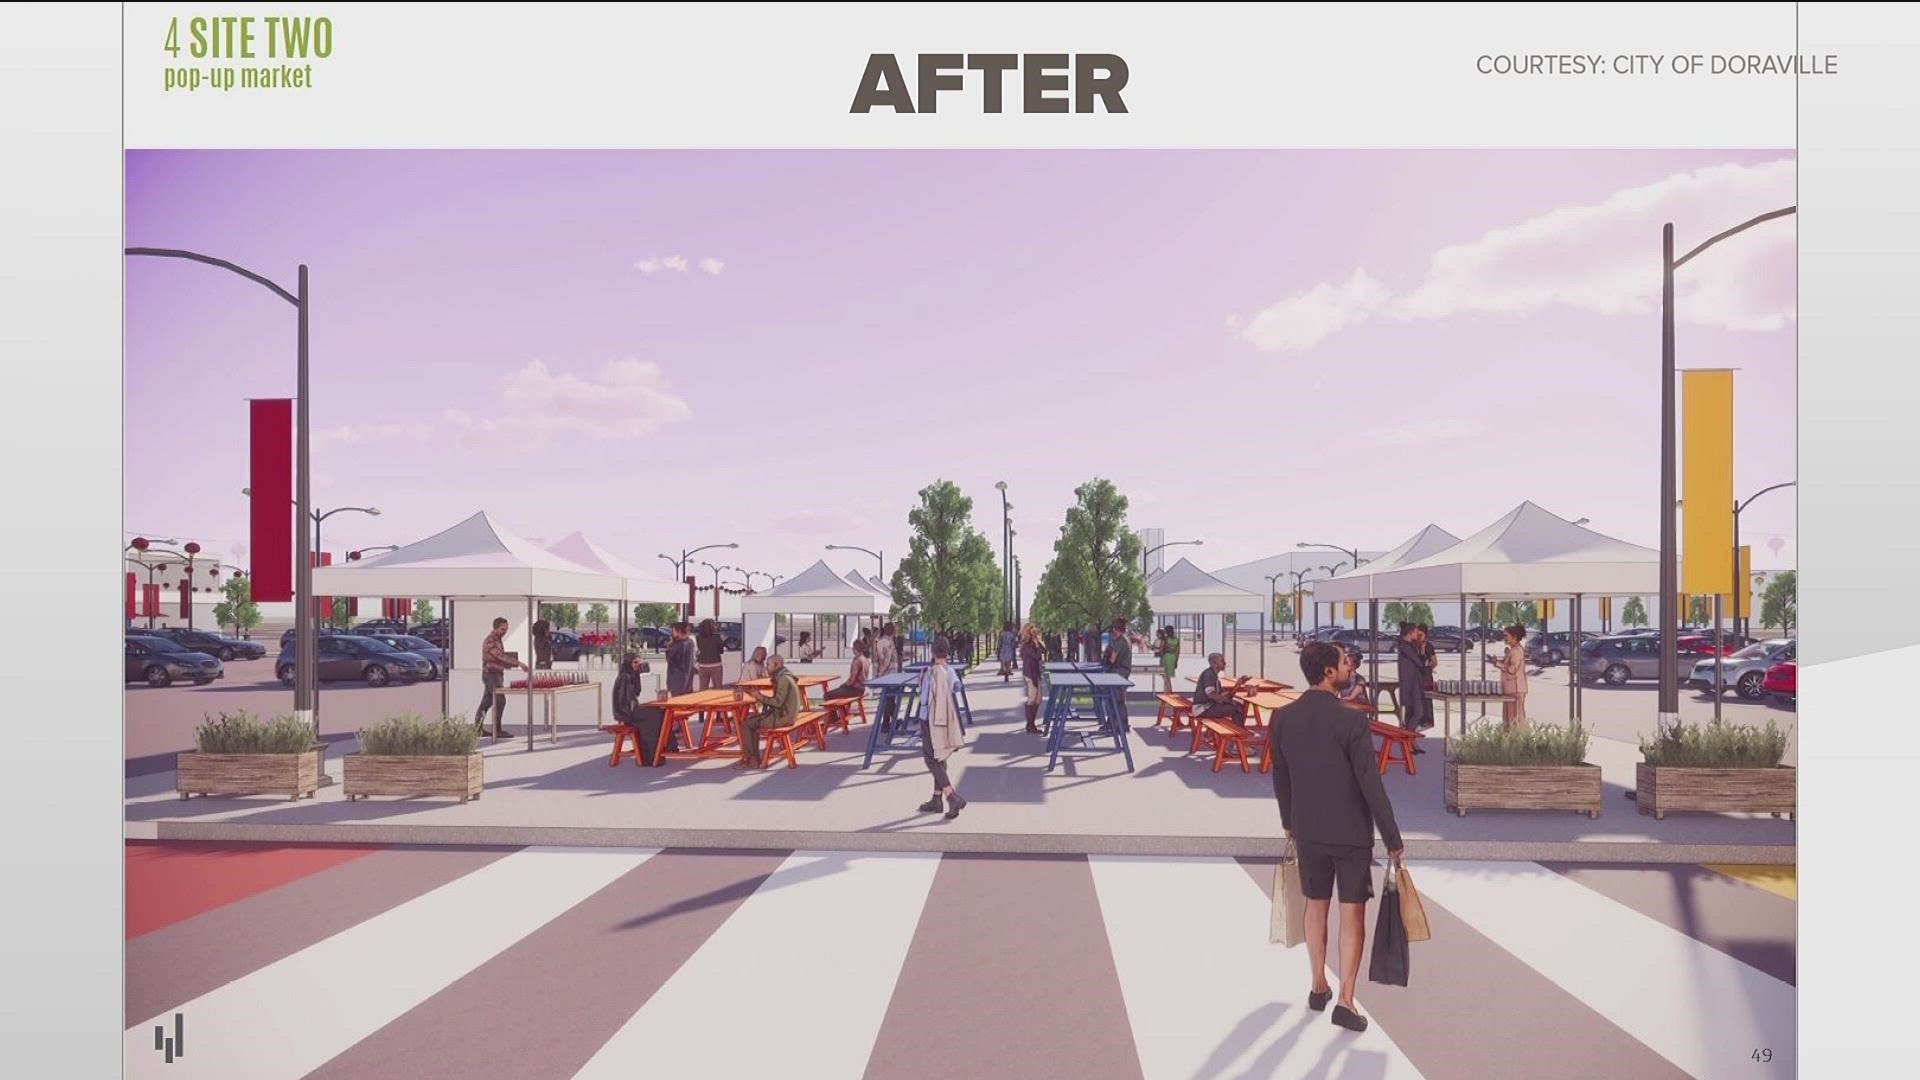 Check out the major changes with the before and after renderings.